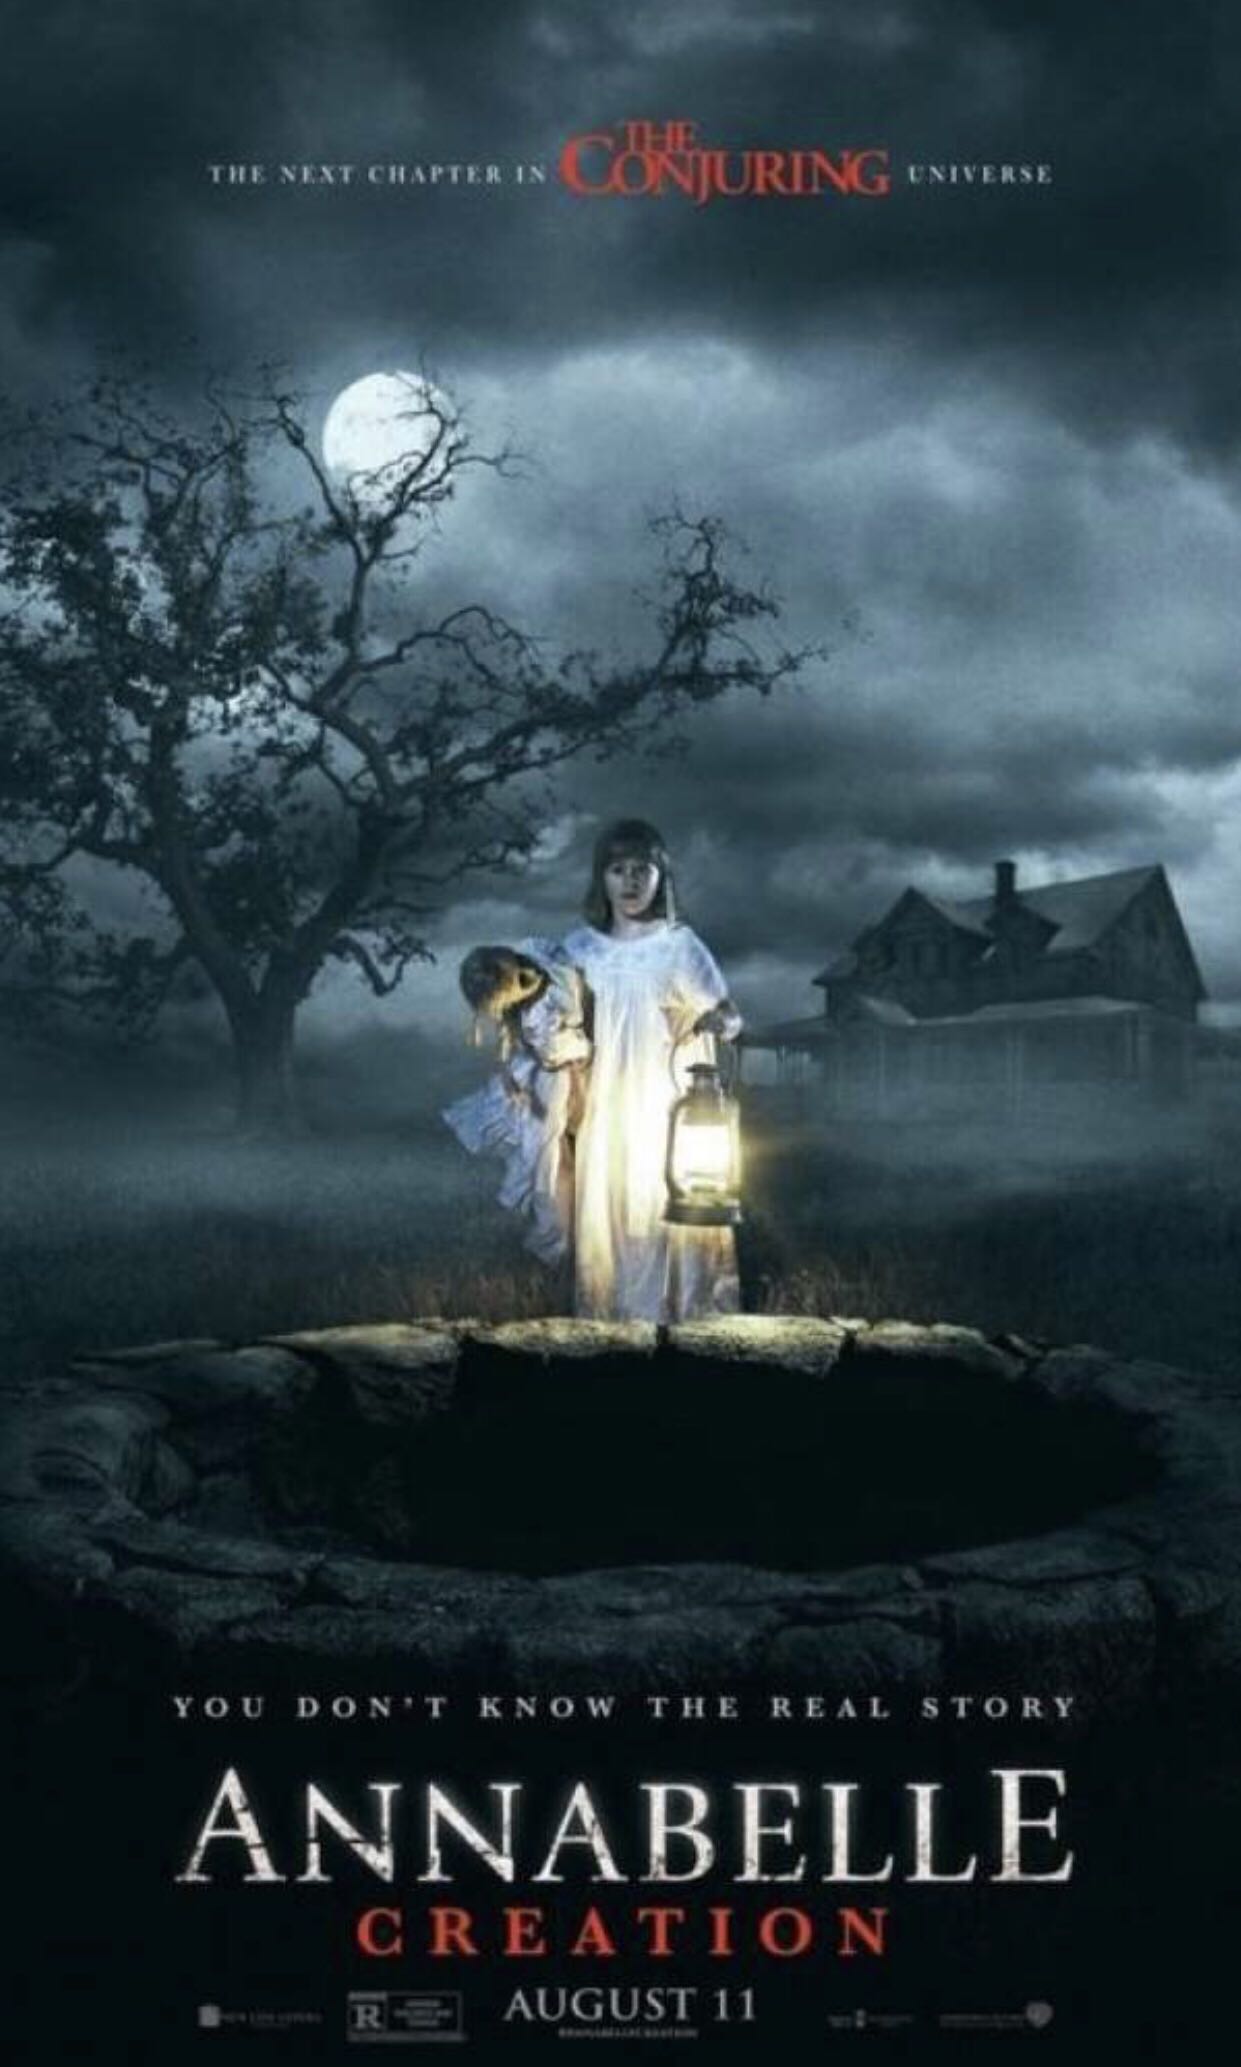 Annabelle: Creation  movie collectible [Barcode 883929569854] - Main Image 3